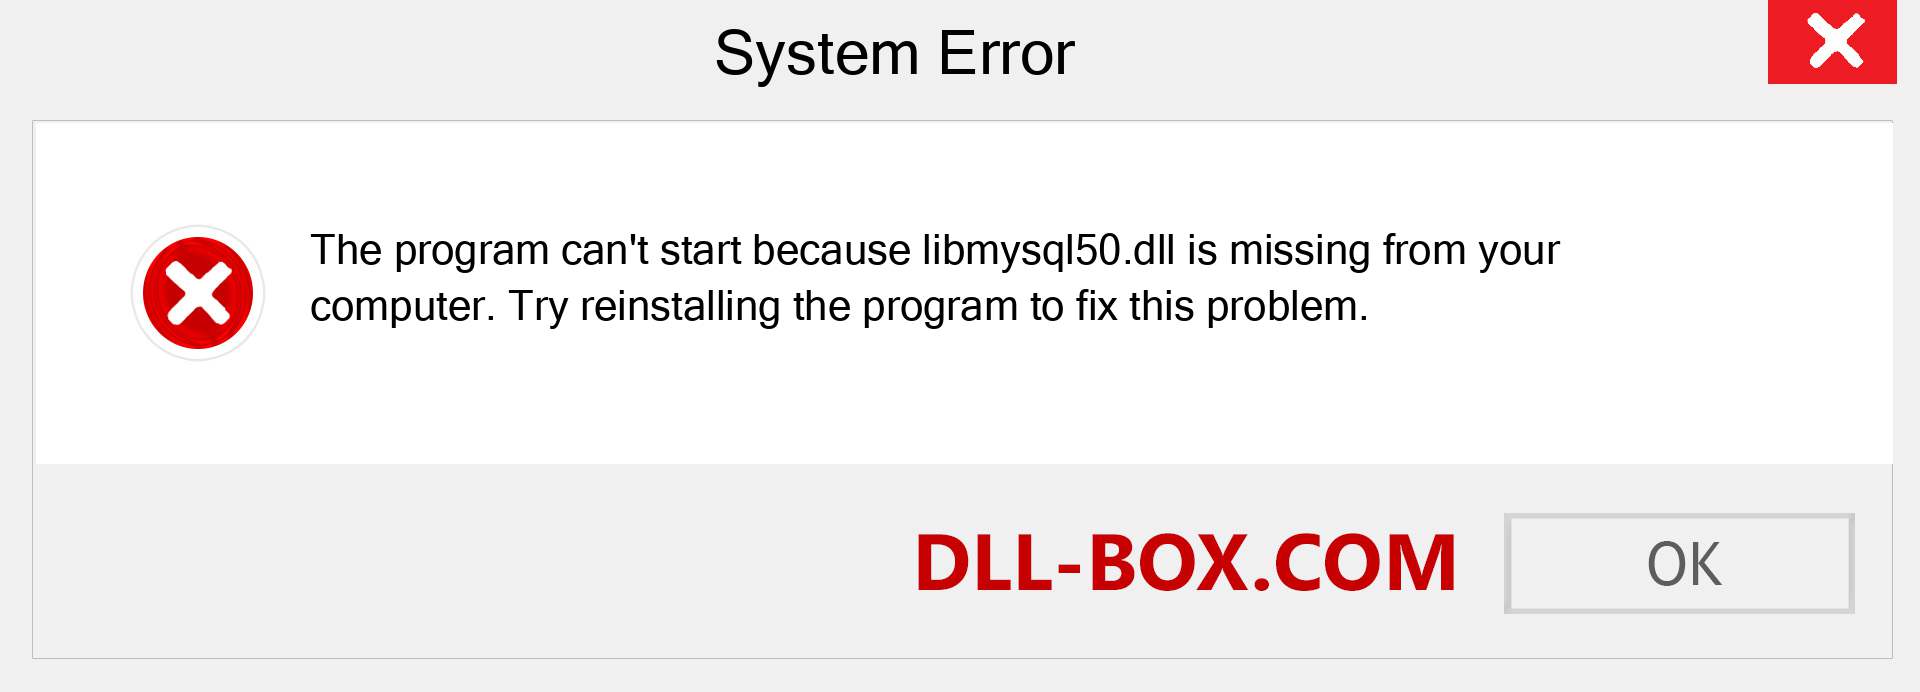  libmysql50.dll file is missing?. Download for Windows 7, 8, 10 - Fix  libmysql50 dll Missing Error on Windows, photos, images